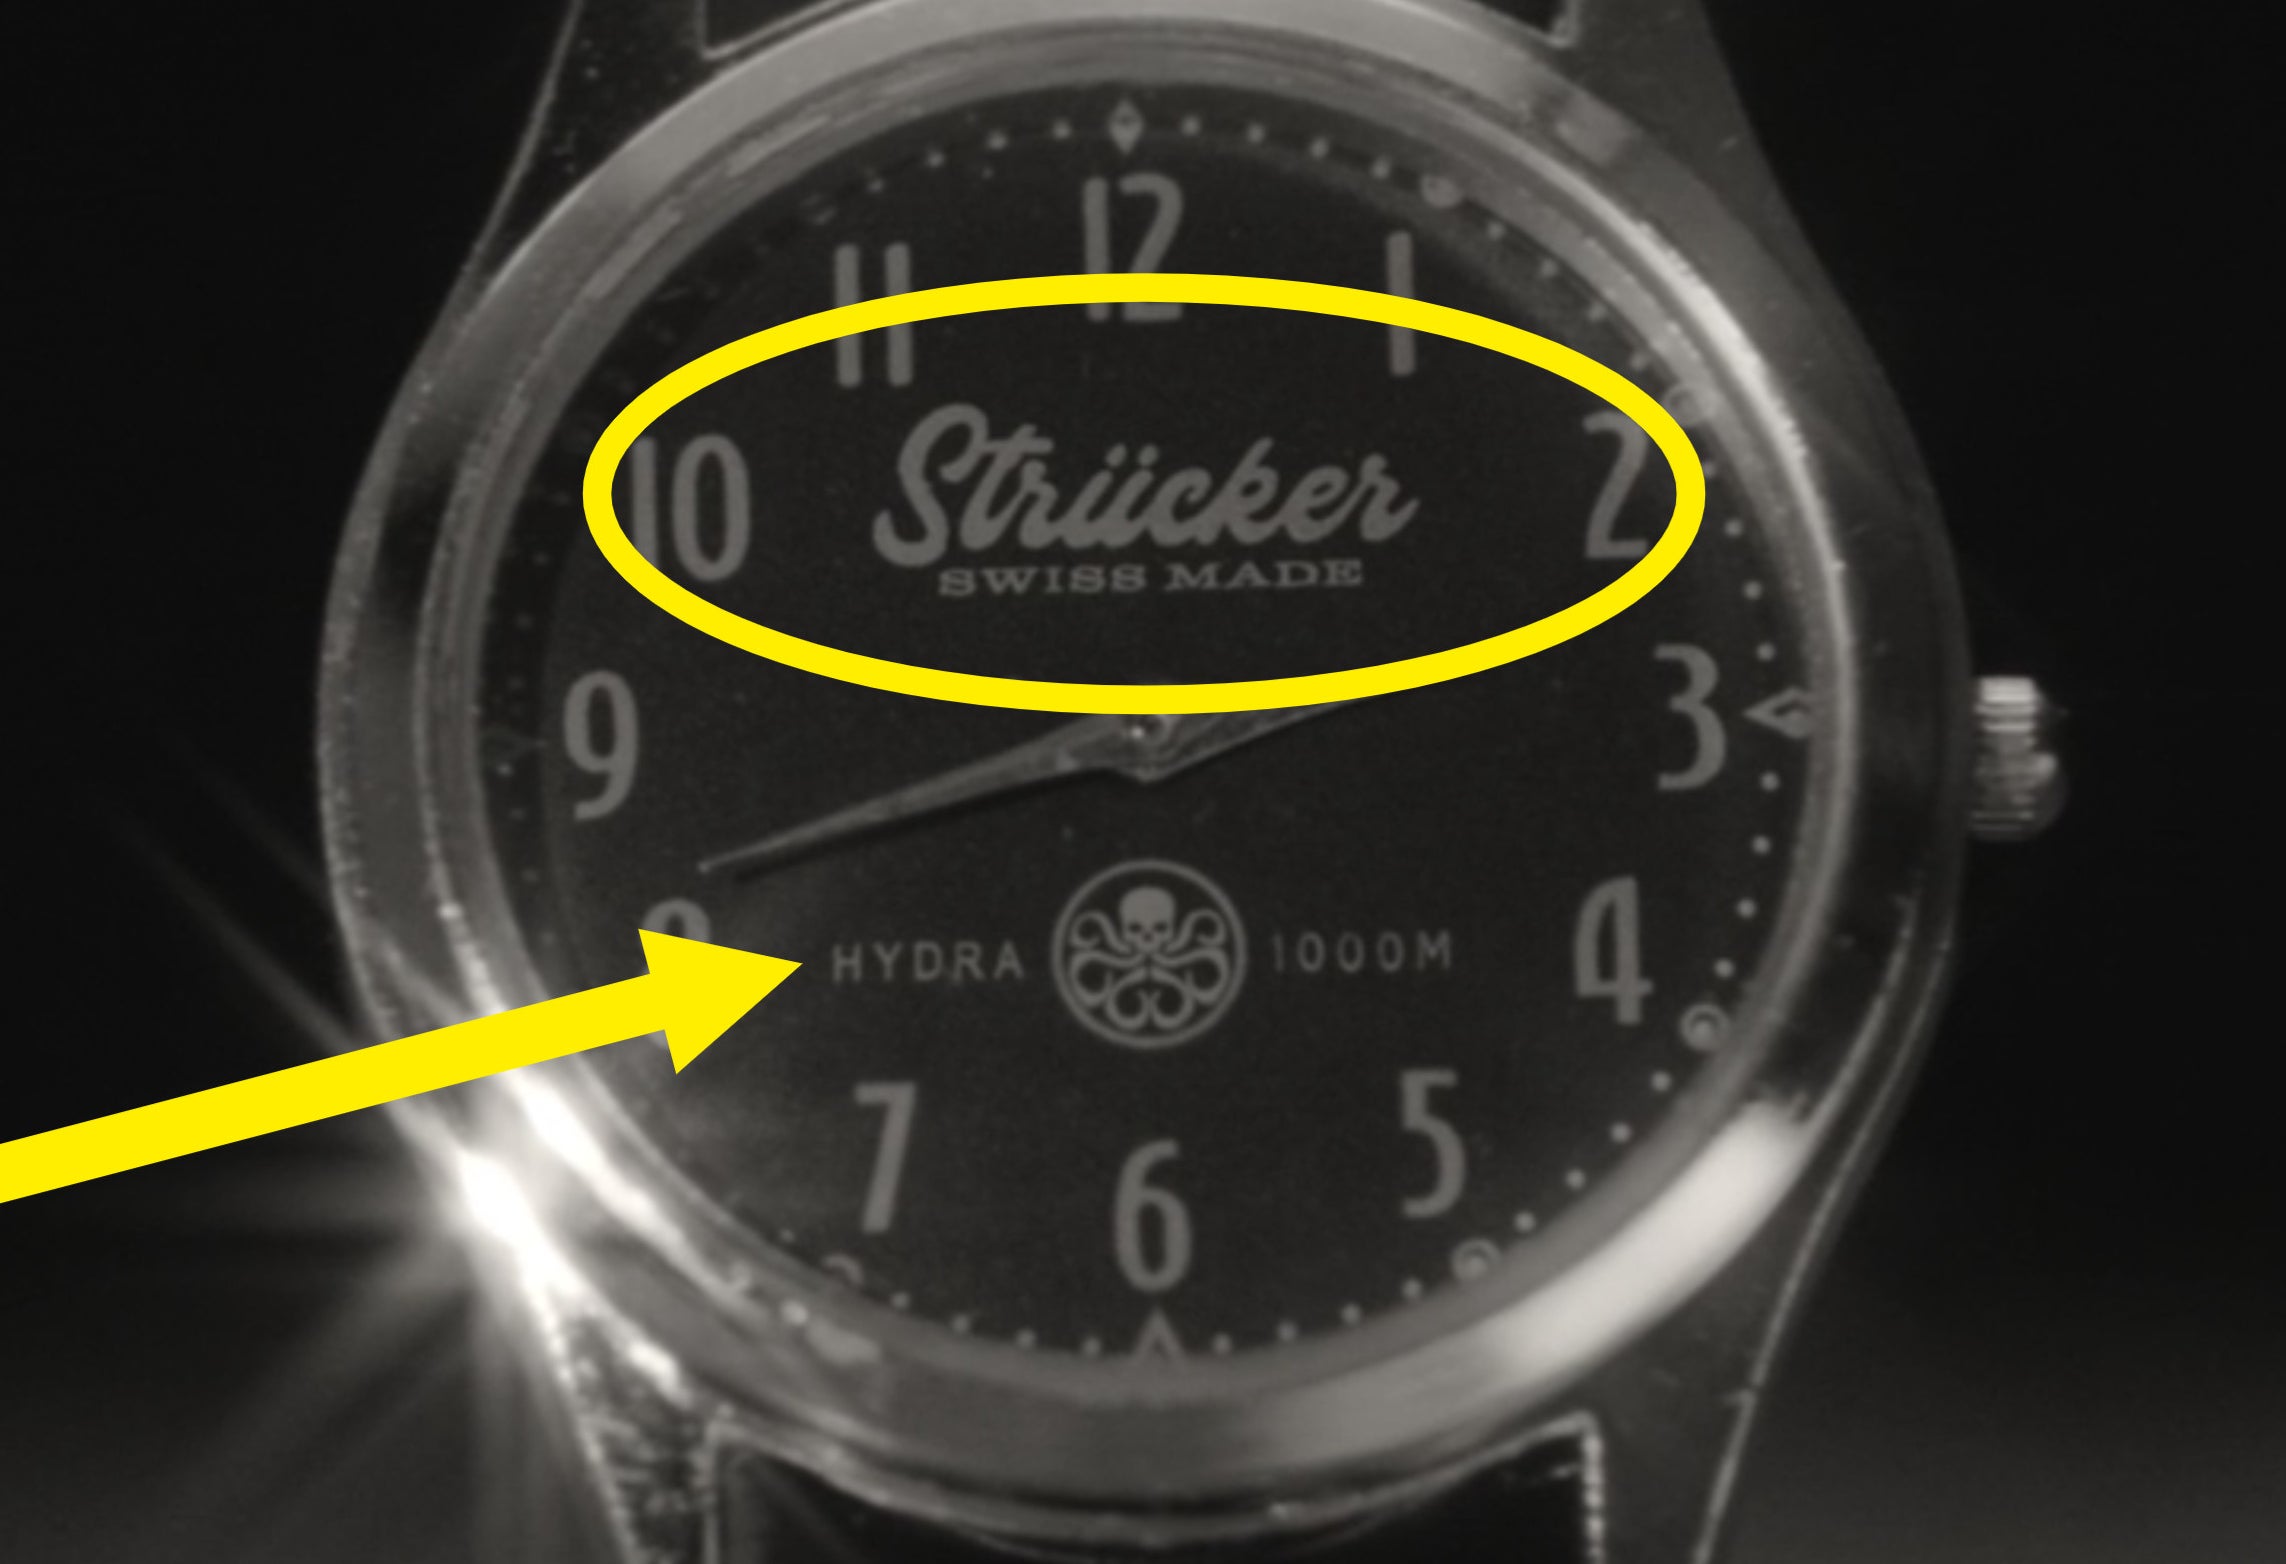 A close-up of the Strucker watch that also says Hydra and has the Hydra logo